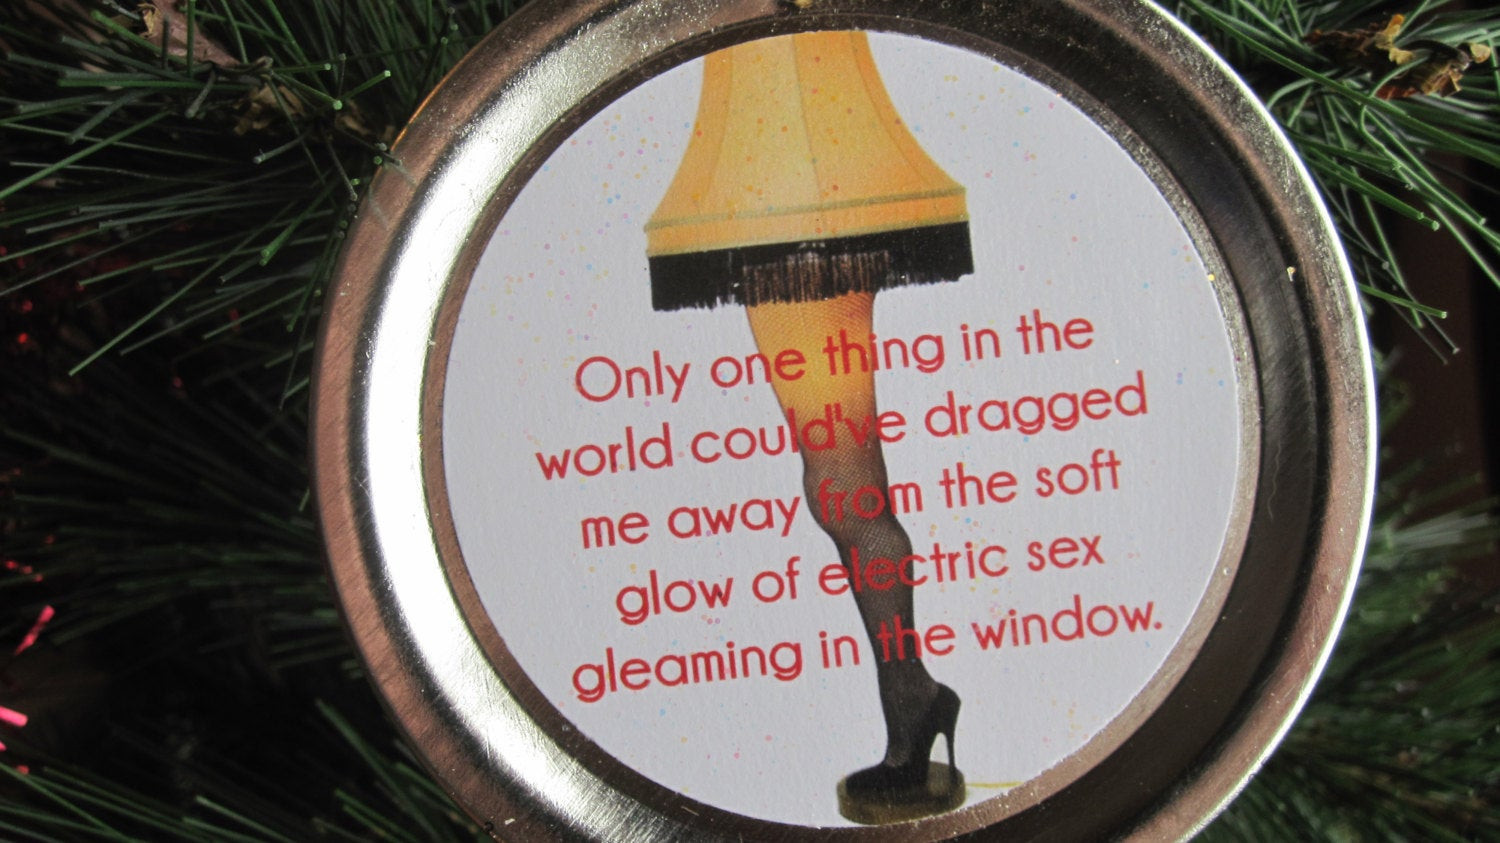 Christmas Story Leg Lamp Quote
 A Christmas Story Ornament Funny Movie Quote by